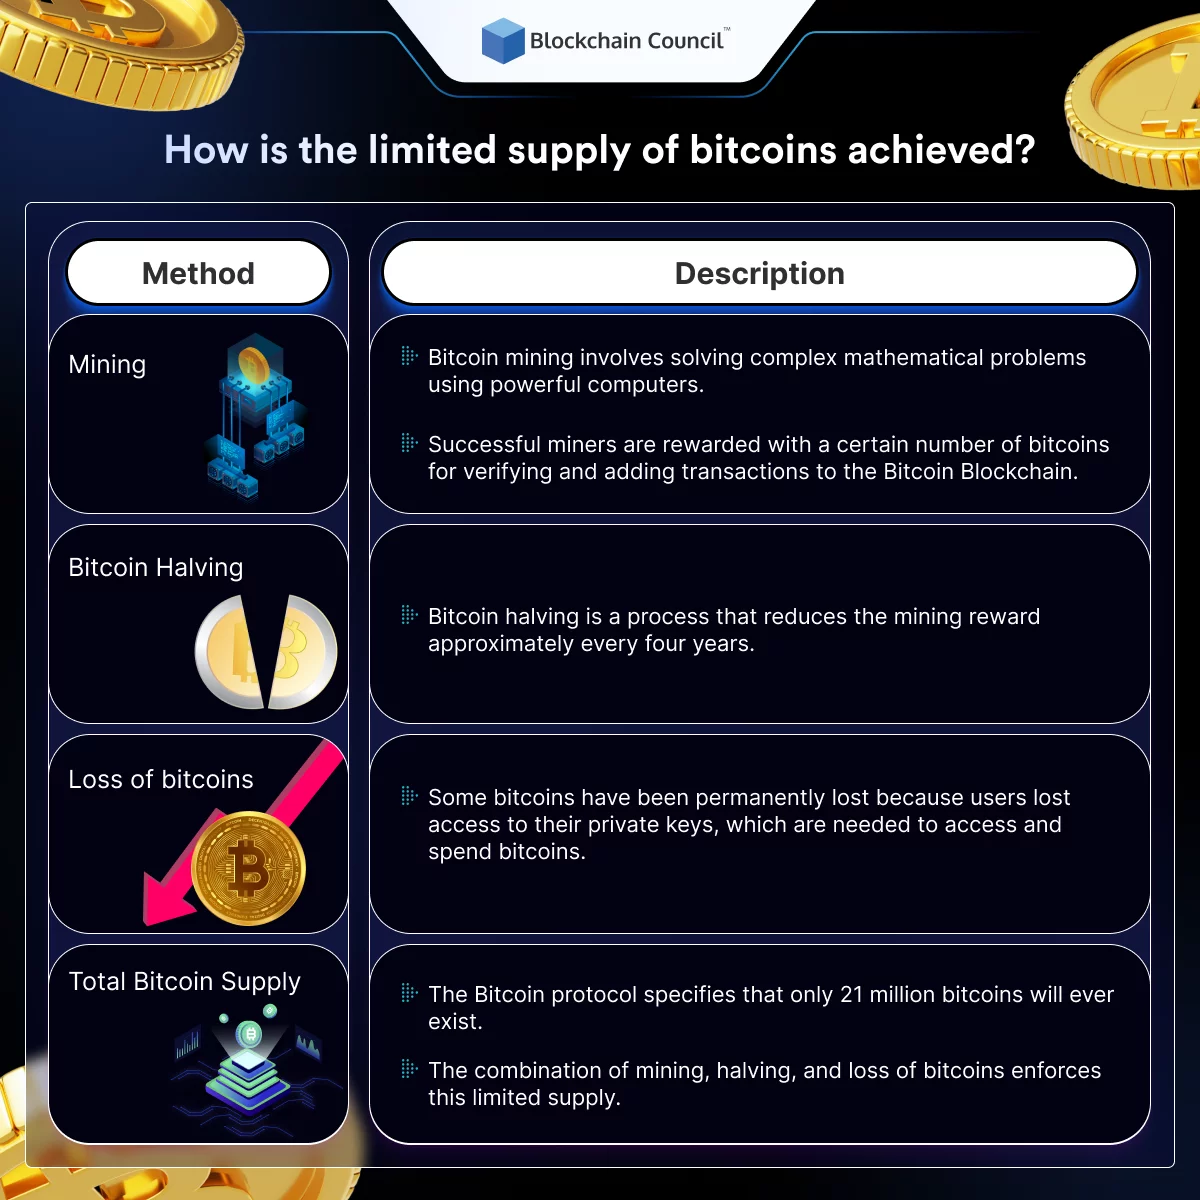 How is the limited supply of bitcoins achieved?